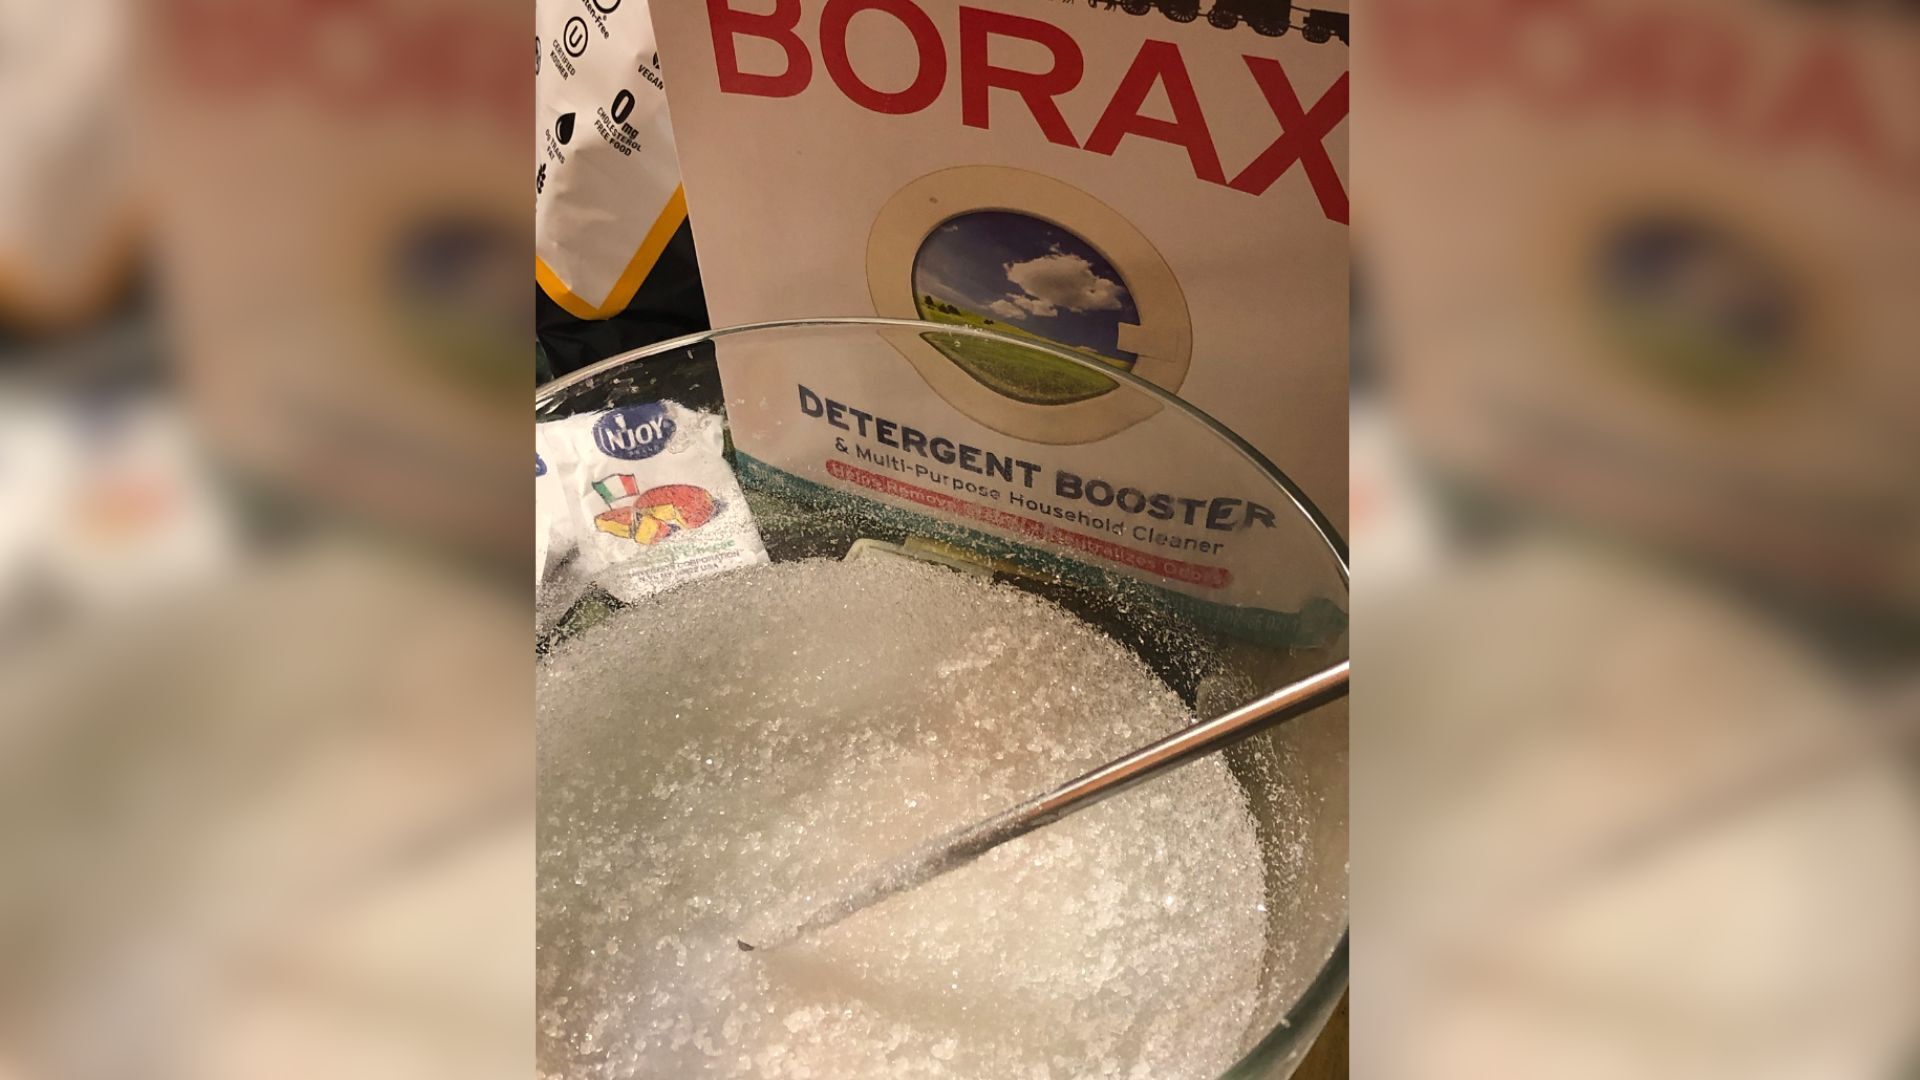 Heard about the borax trend? Jumping onto it is dangerous